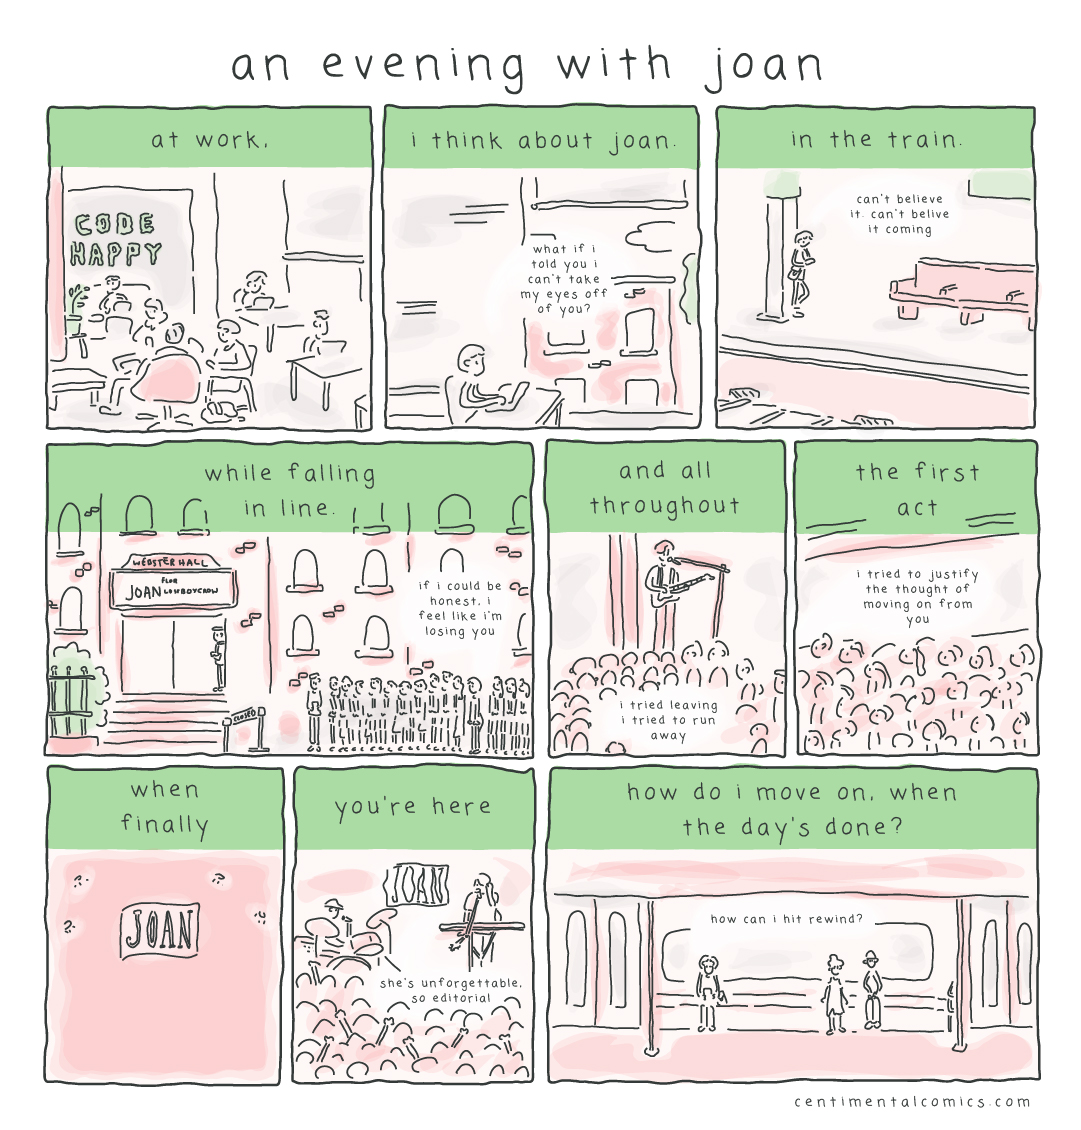 an evening with joan